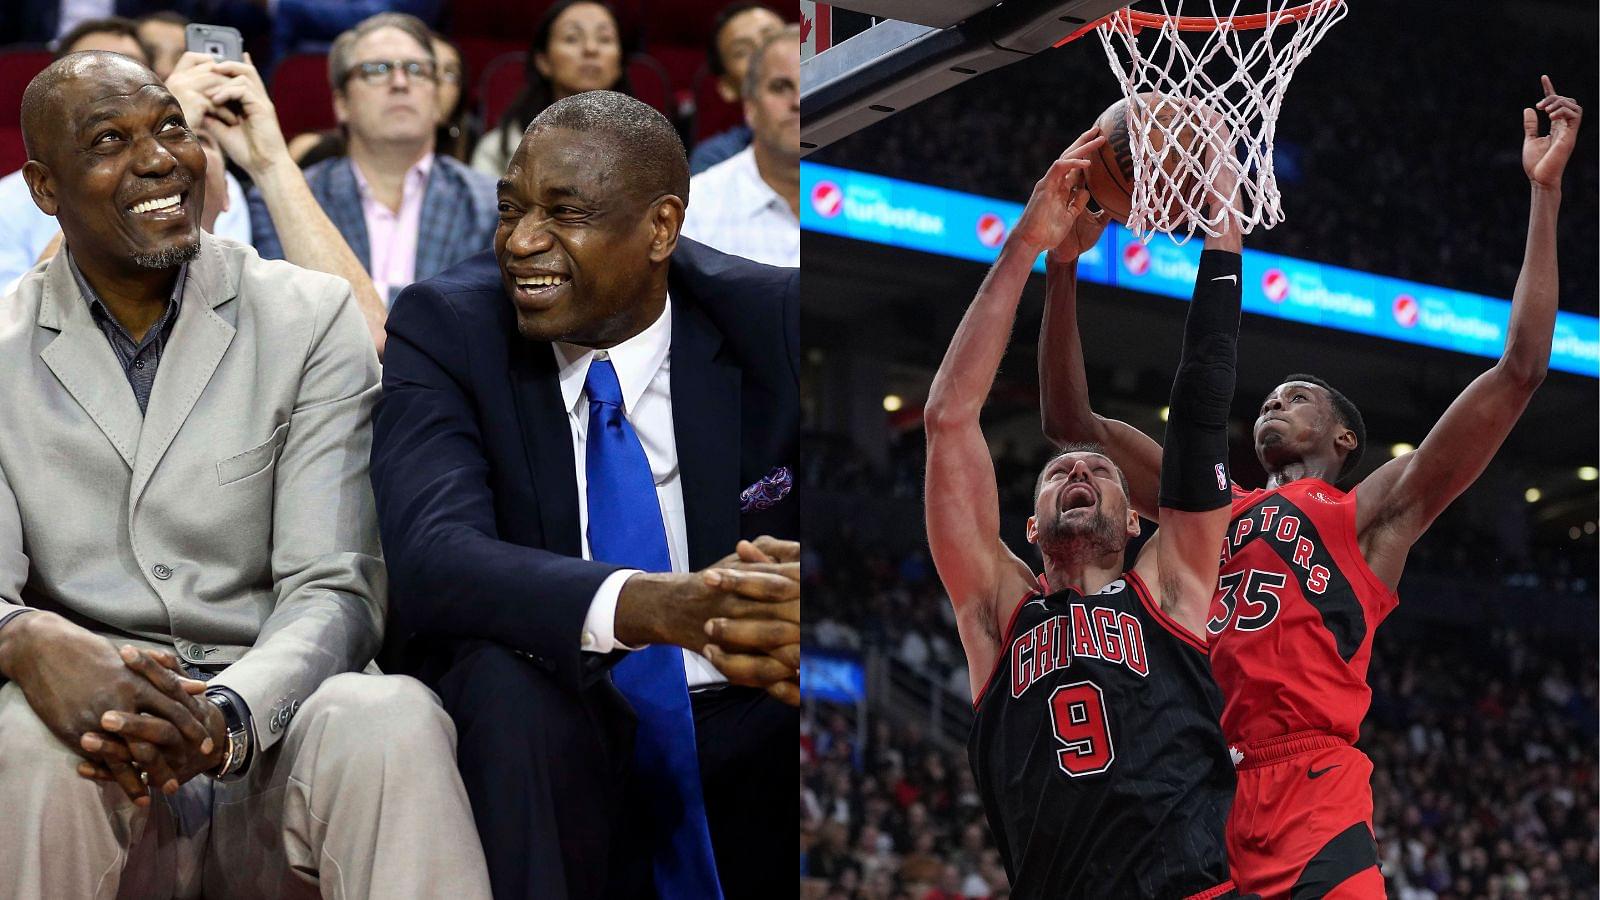 “This Christian Koloko Dude is Better Than Dikembe Mutombo”: NBA Twitter Is Impressed By the Raptors Rookie’s 6 Blocks in a 113-104 W vs Bulls